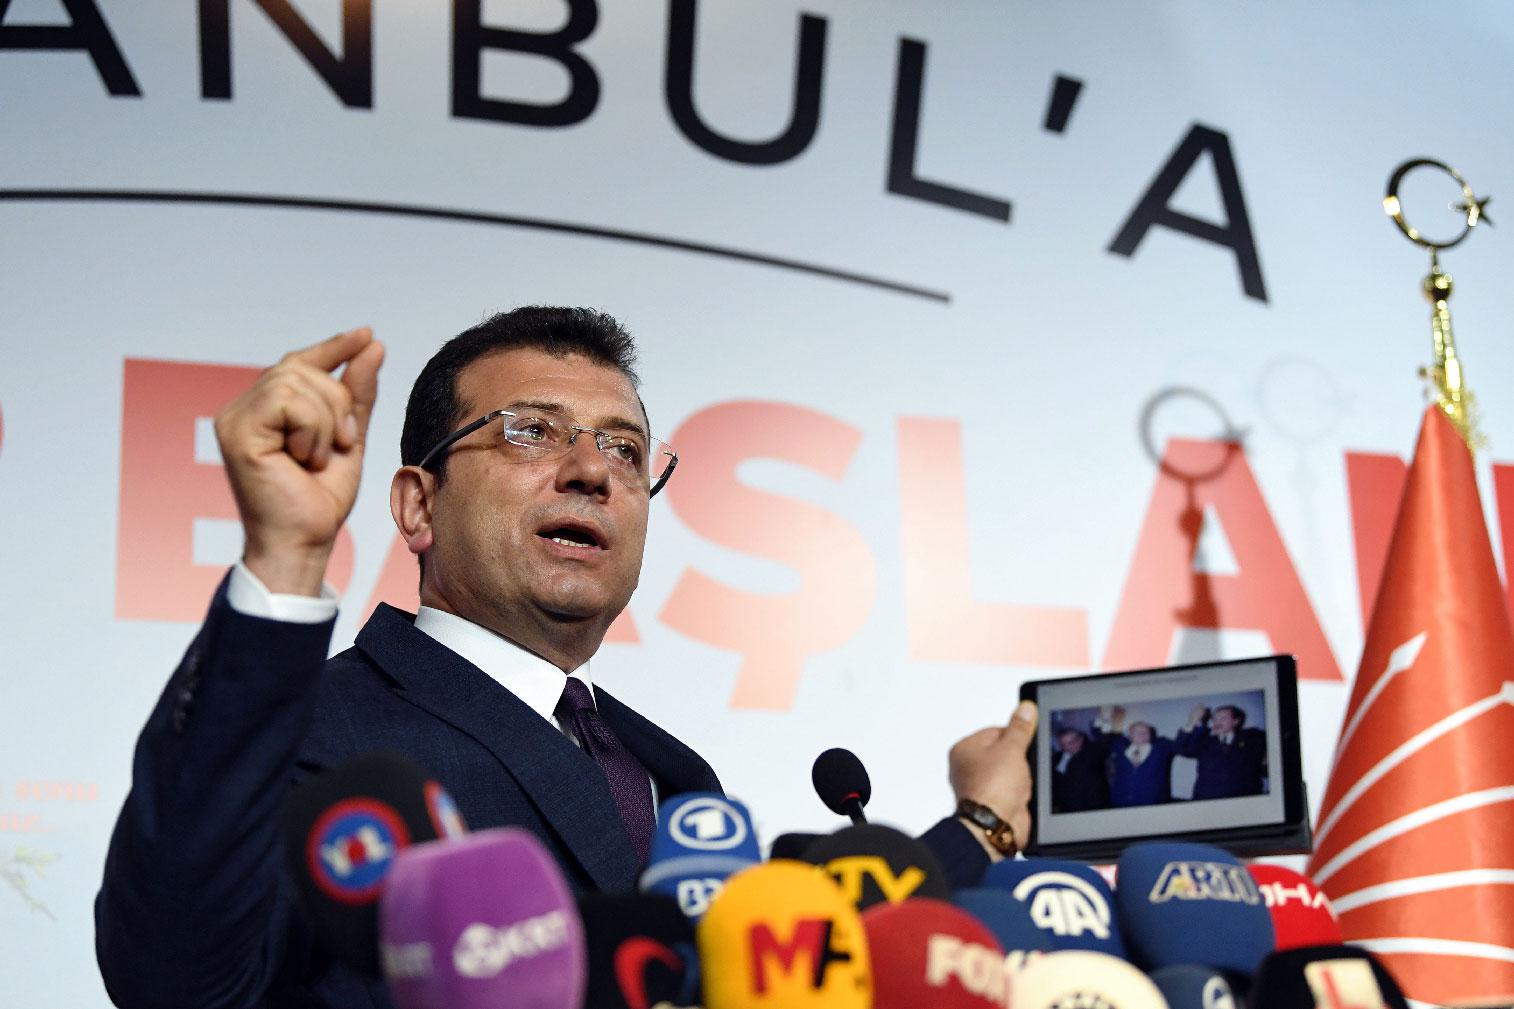 Turkey's main opposition party CHP candidate Ekrem Imamoglu, who claimed victory as Istanbul mayor, shows a picture of the 1994 local election featuring Istanbul Metropolitan municipality Refah Party (RP) candidate Recep Tayyip Erdogan (R), conservative Refah Party (RP) leader Necmettin Erbakan (C) and his opponent Social Democratic Populist Party (SHP) Nurettin Sozen, on his tablet during a press conference at the CHP's Election Coordination Centre in Istanbul on April 3, 2019.